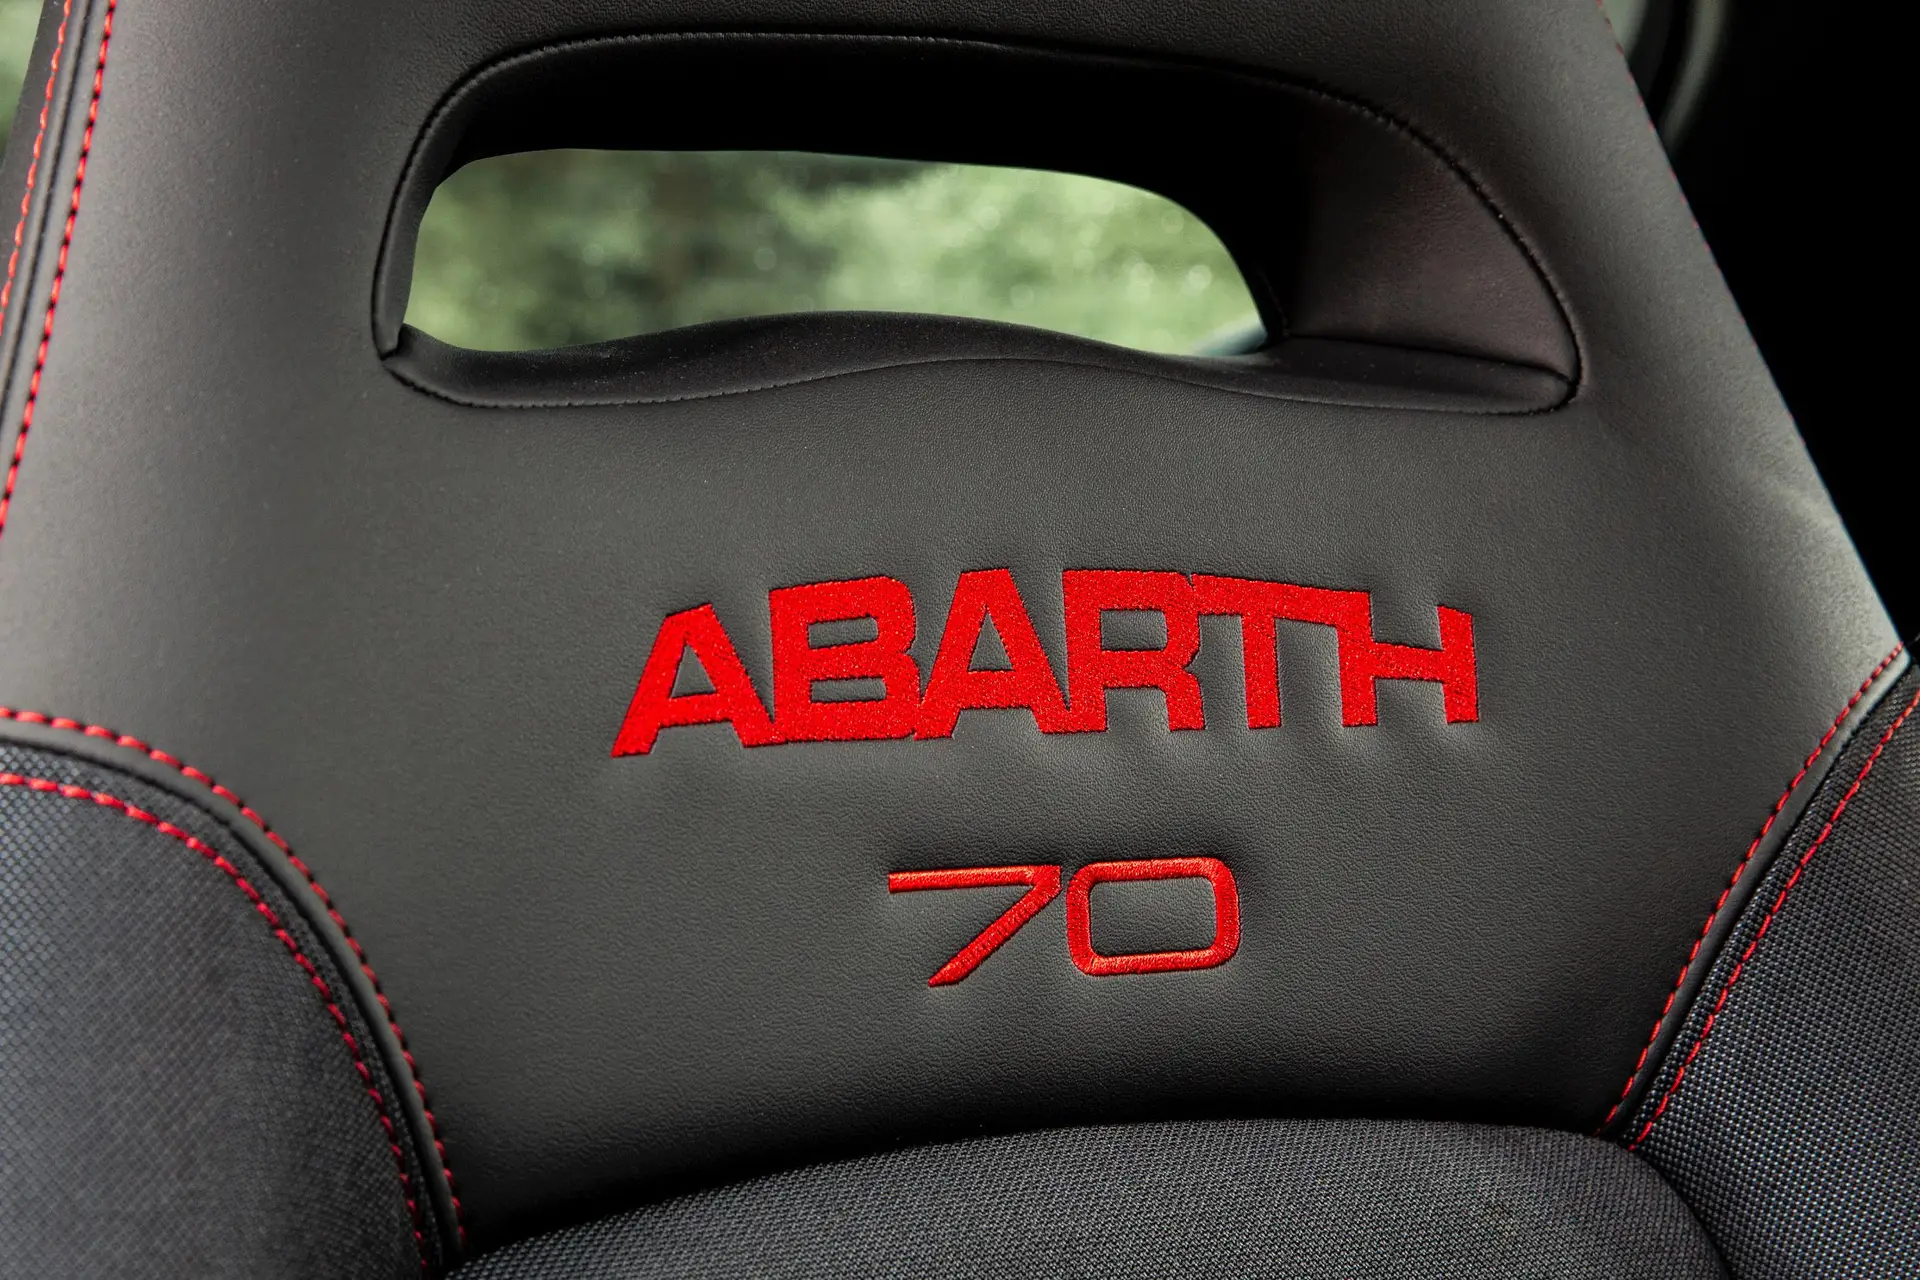 Abarth 595 Review 2023: Seat 